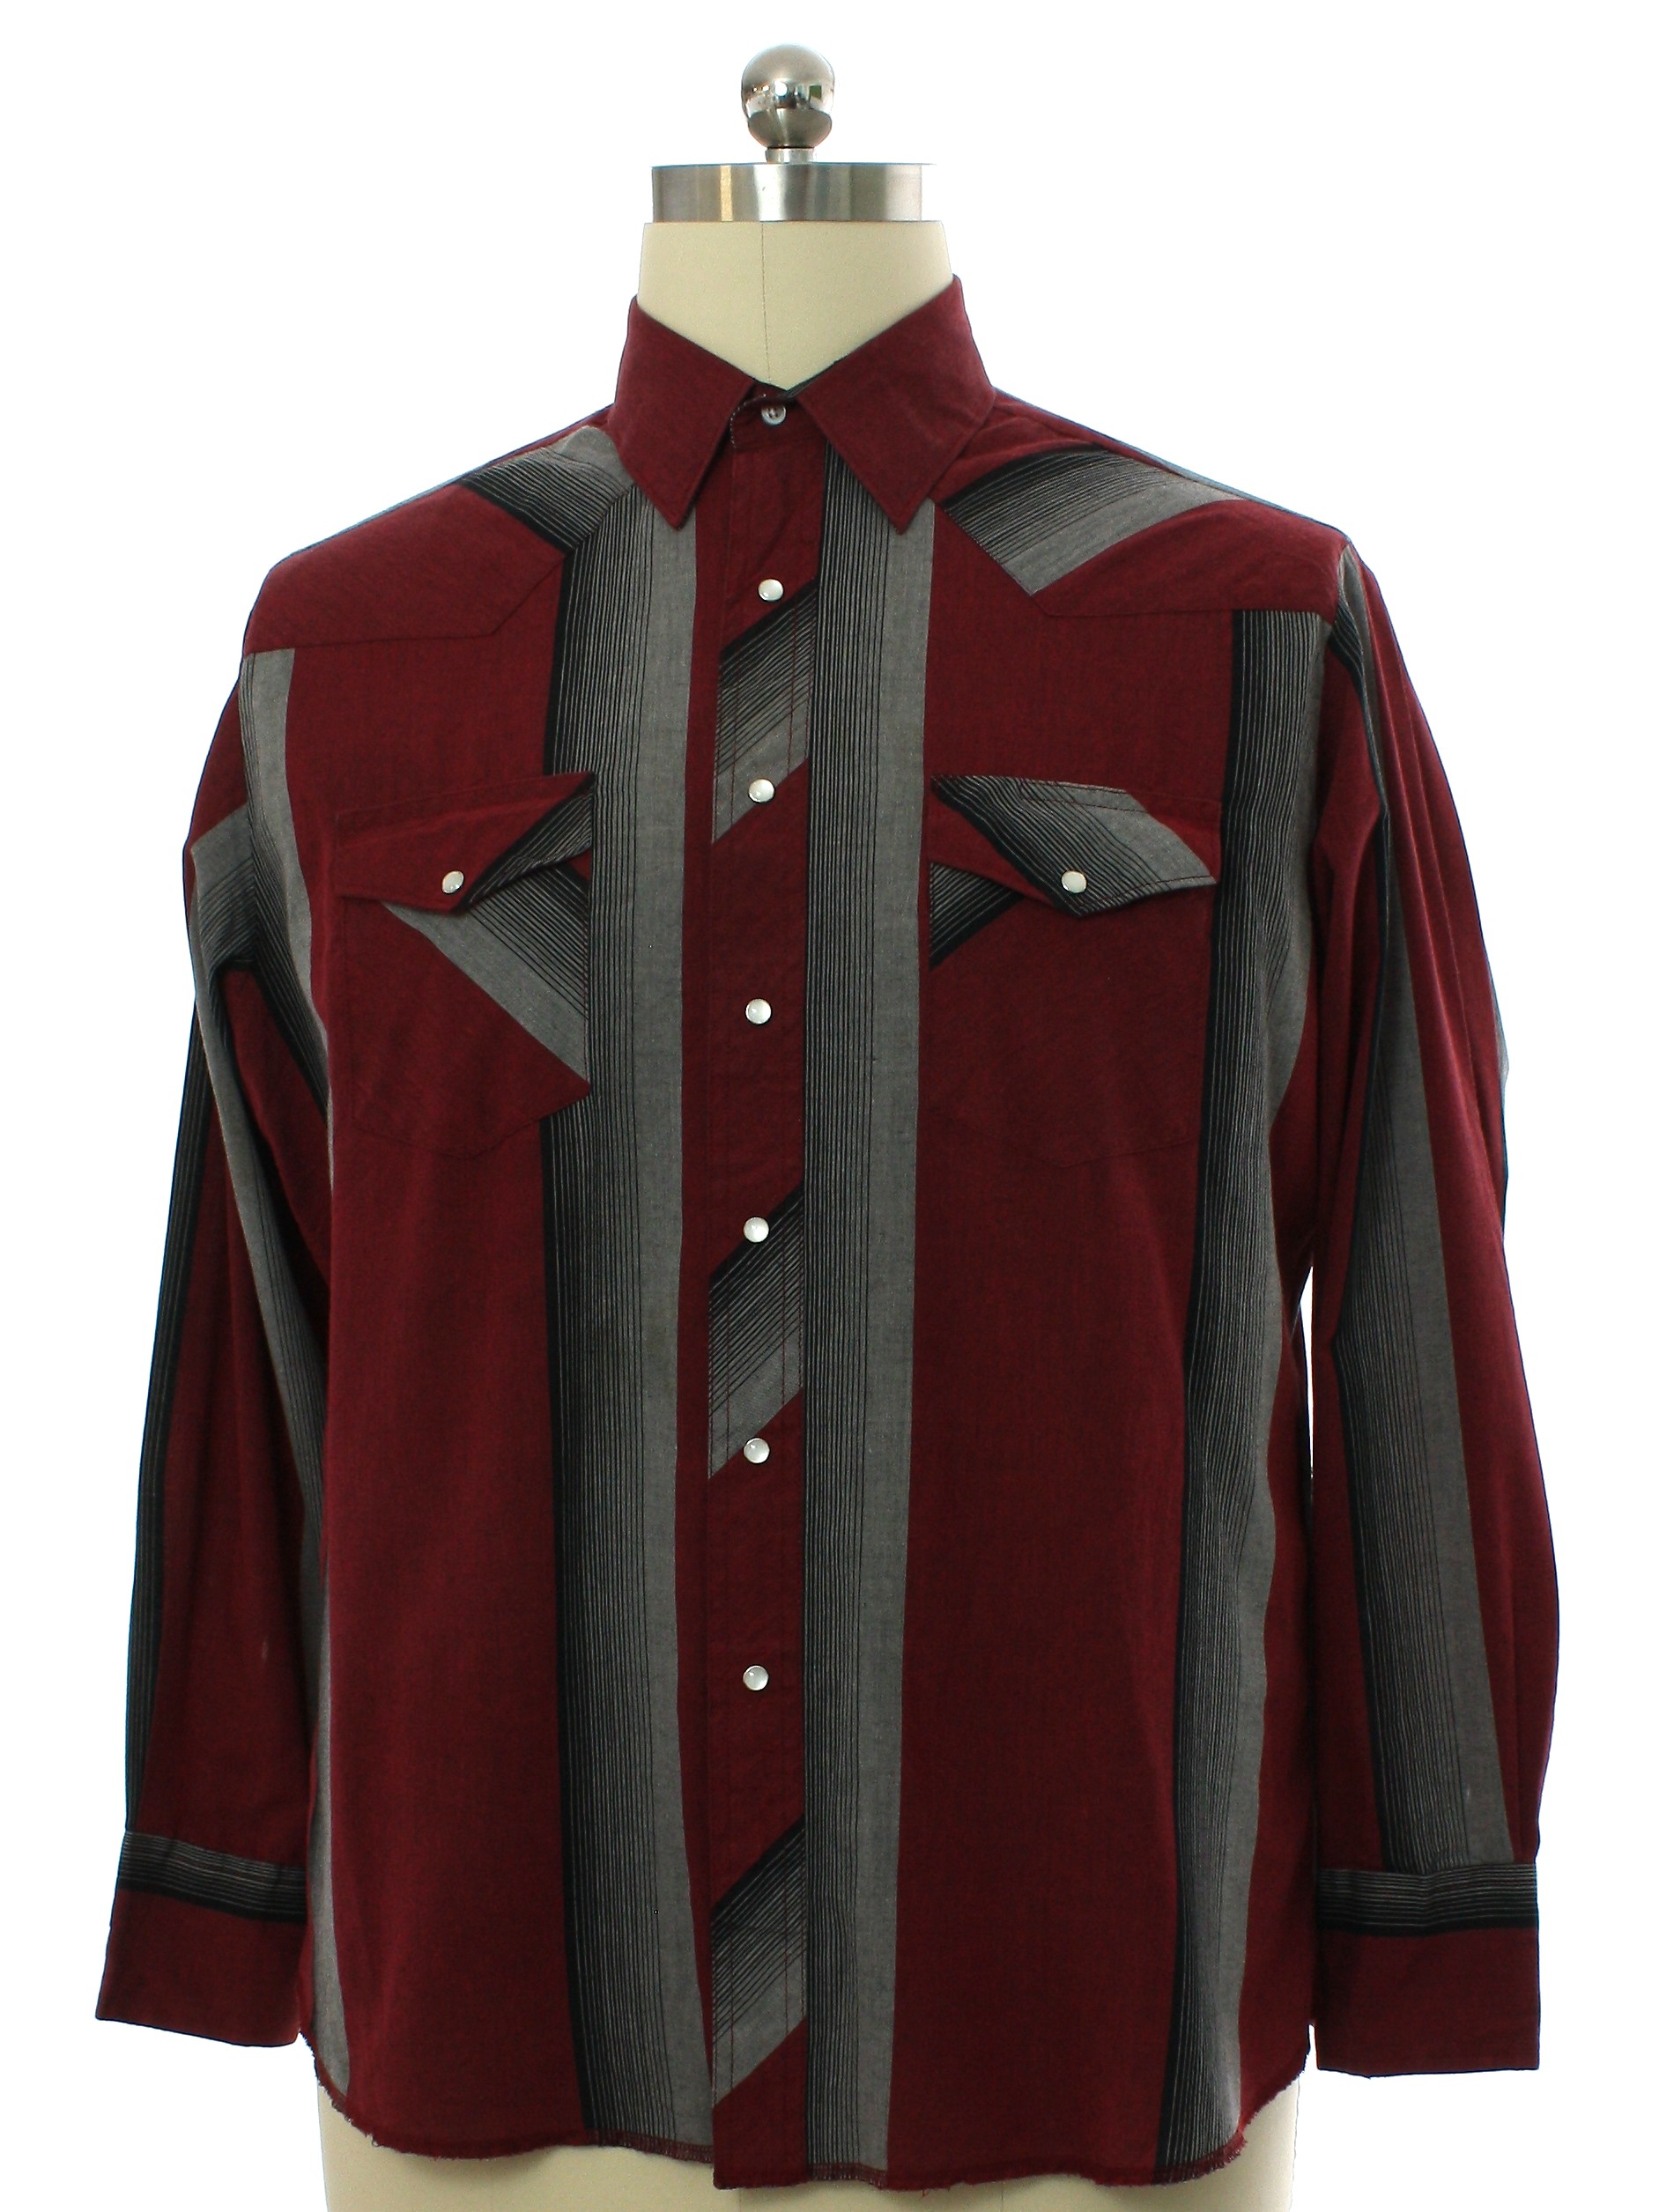 Western Shirt: 90s -Rustler- Mens red, gray, and black striped ...